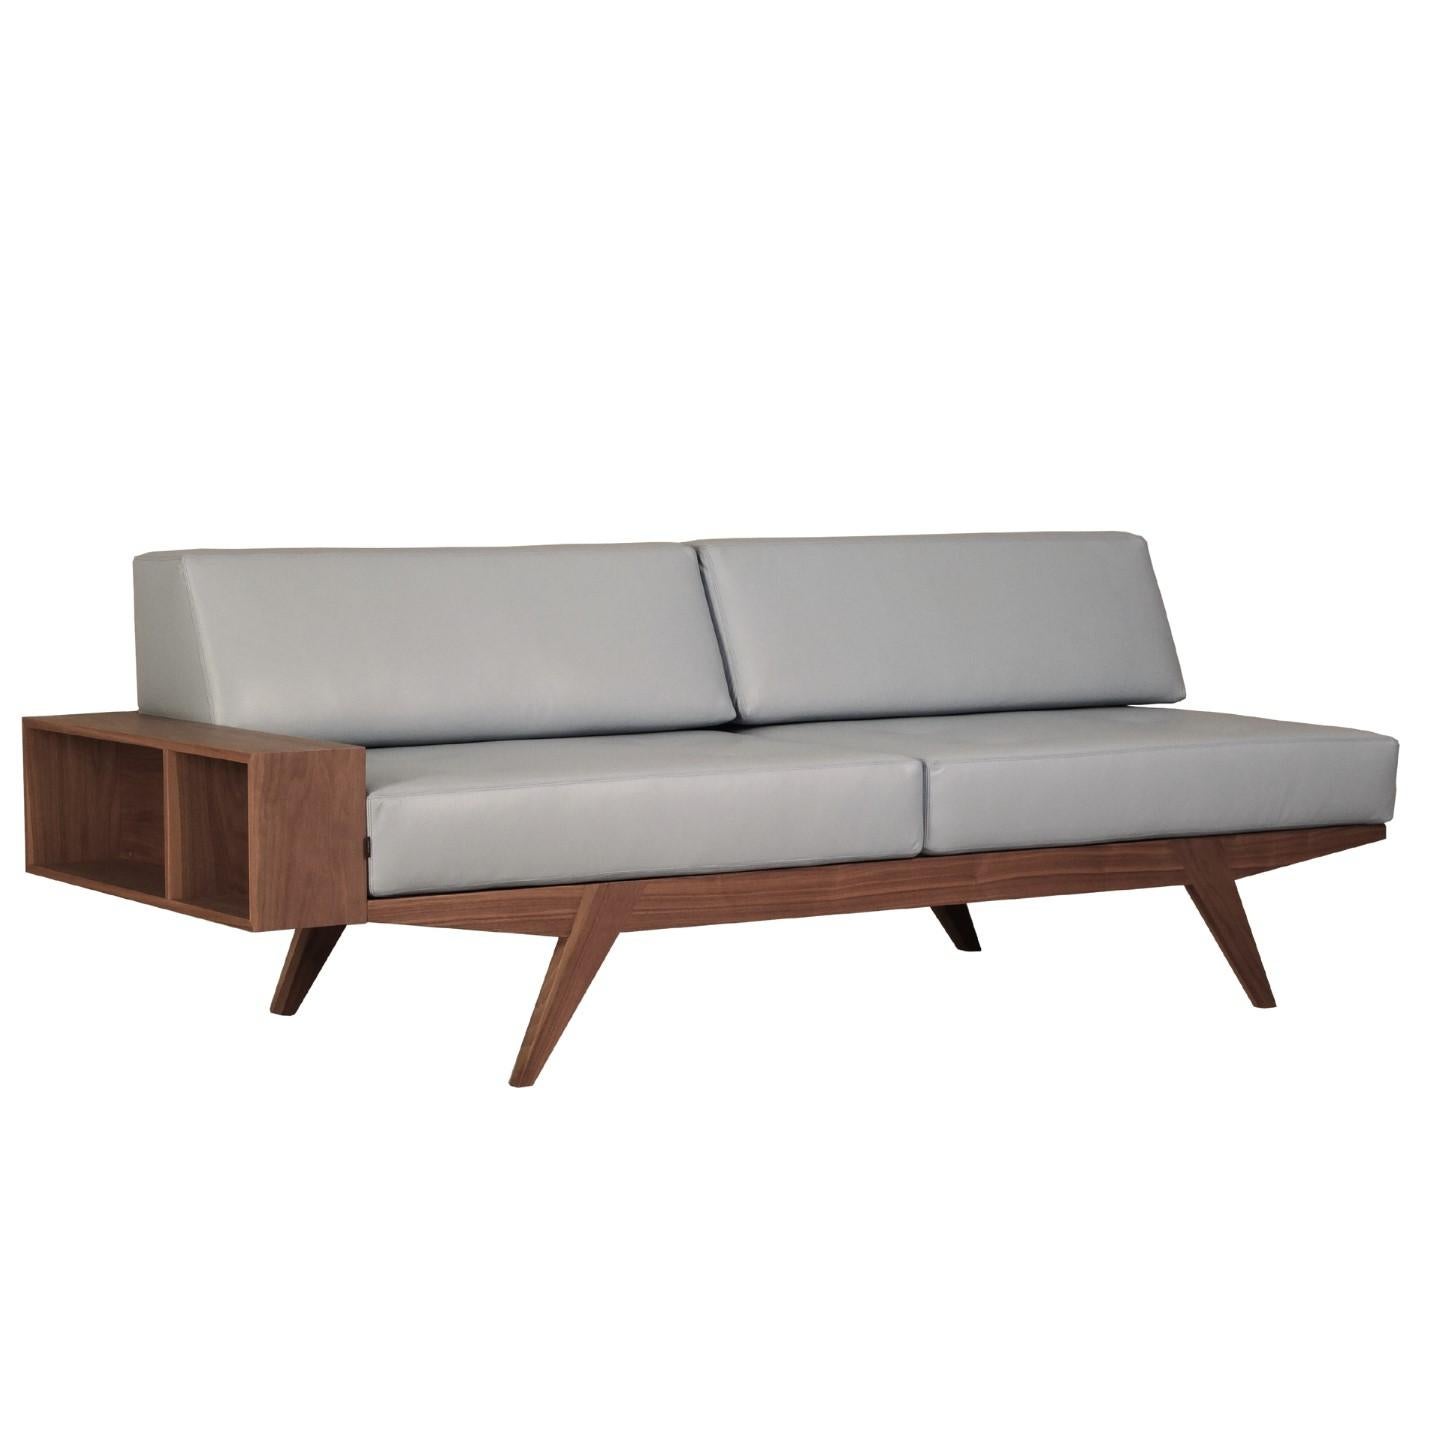 Contemporary sofa bed with removable cushions, frame made of solid cherrywood
Upholstered with fabrics, velvet or leather
Available in different finishes and coating materials.
 